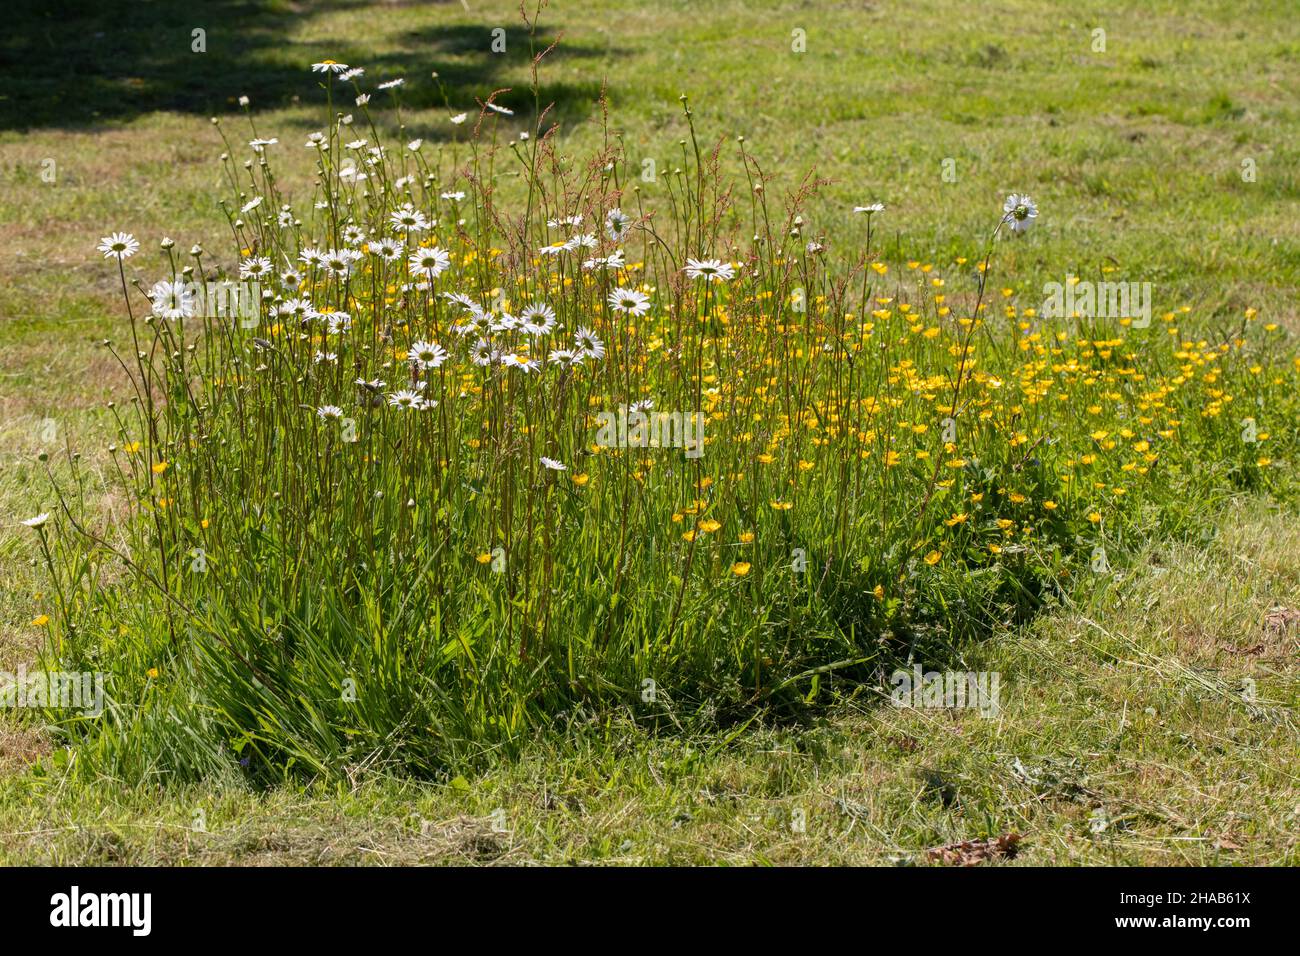 Churchyard grave yard burial ground seasonal managed unmown island for wildlife flowering plants Oxeye Daisy, conservation, bio-diversity, survival Stock Photo